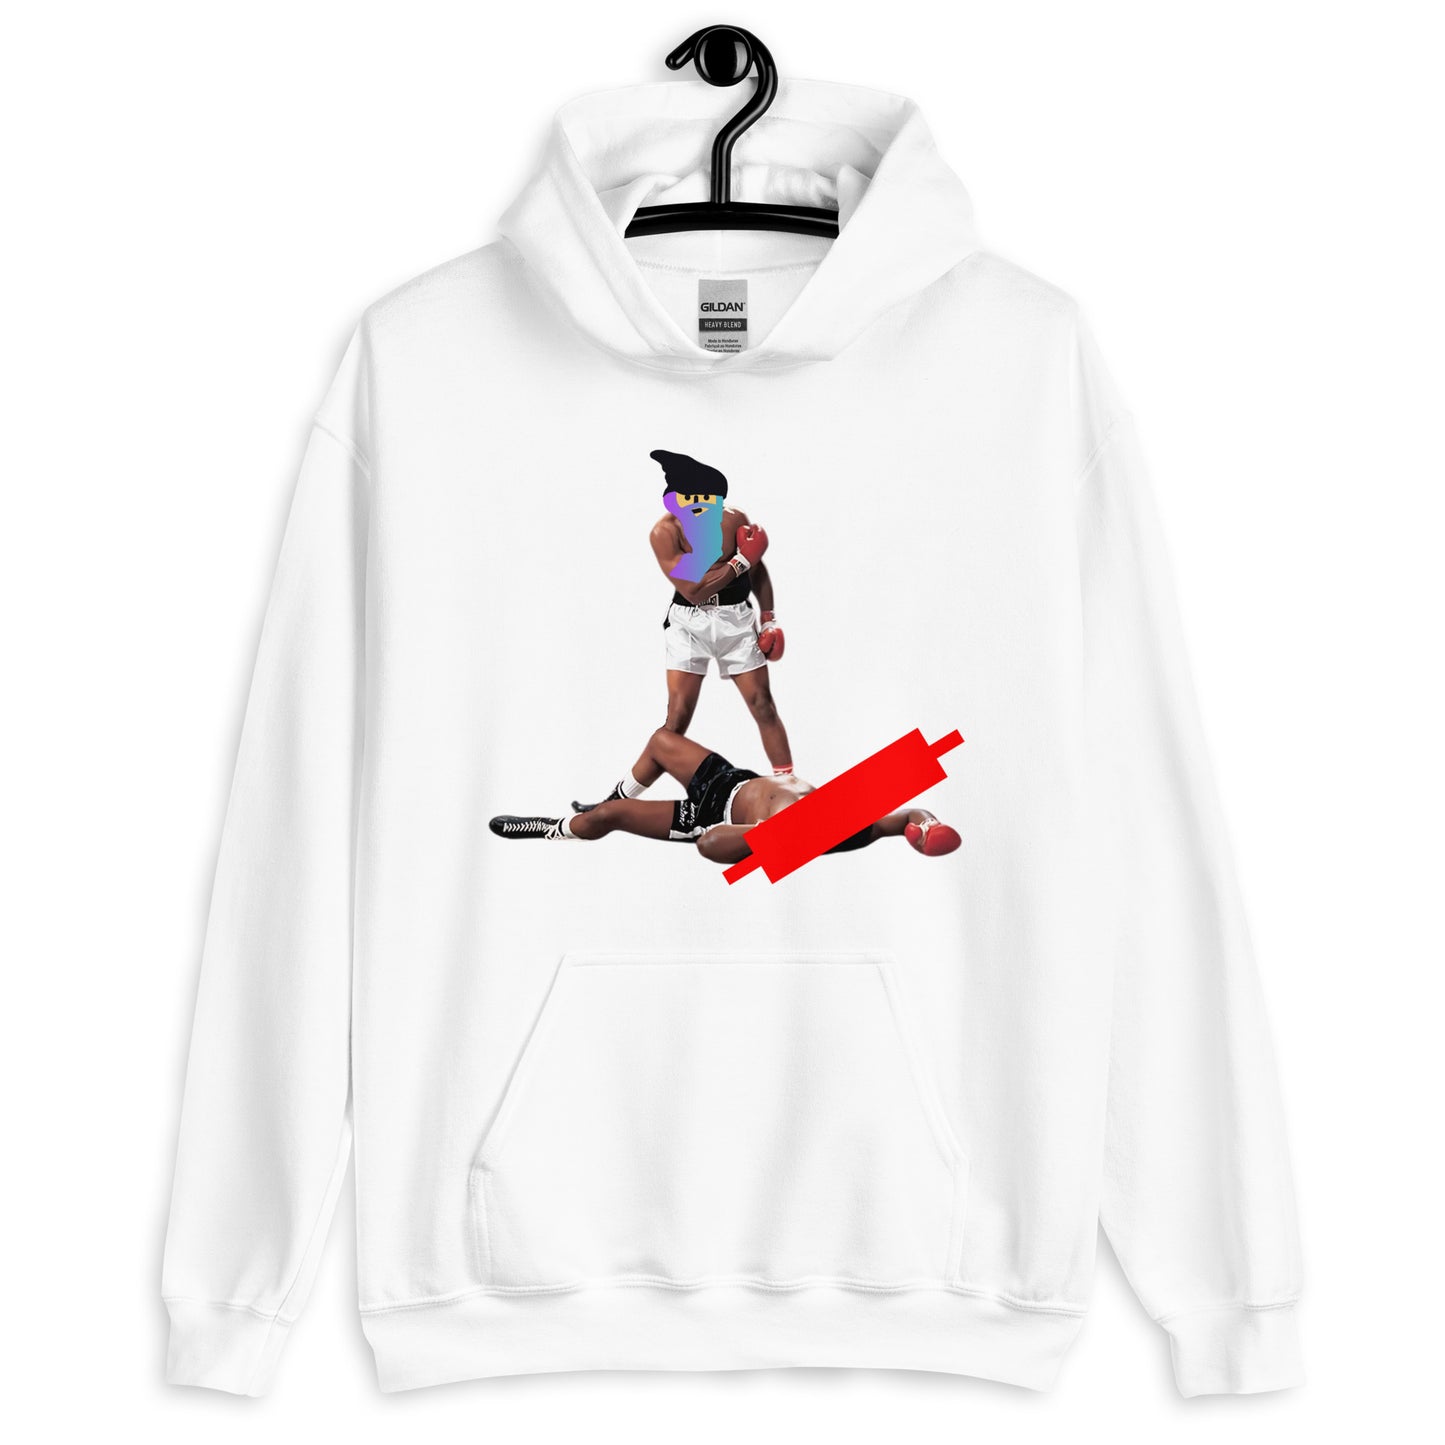 Knock Out Hoodie